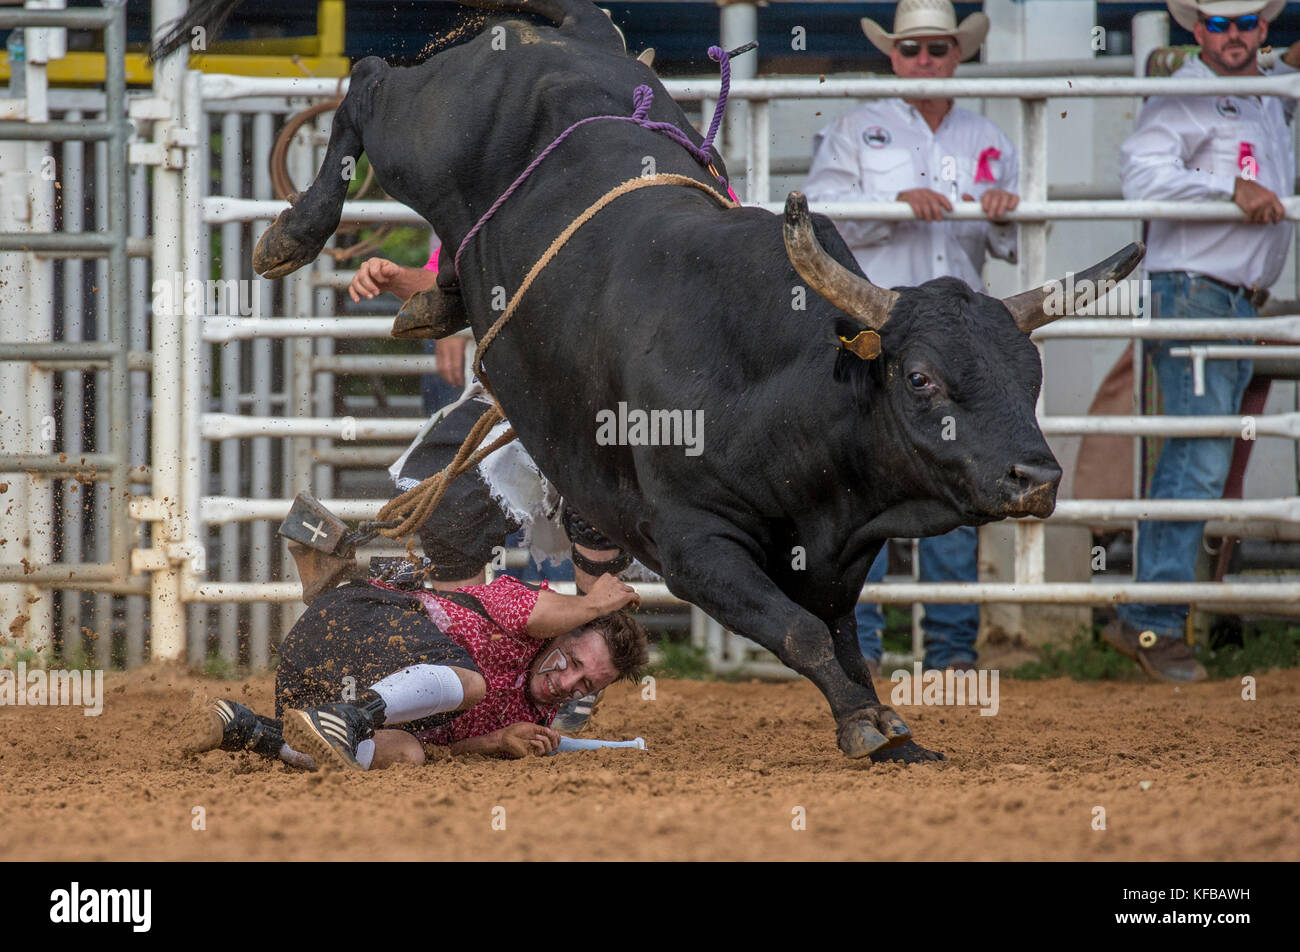 Rodeo clown on ground under a bull after throwing its rider in the 4th Annual Fall PRCA Rodeo in Arcadia Florida Stock Photo